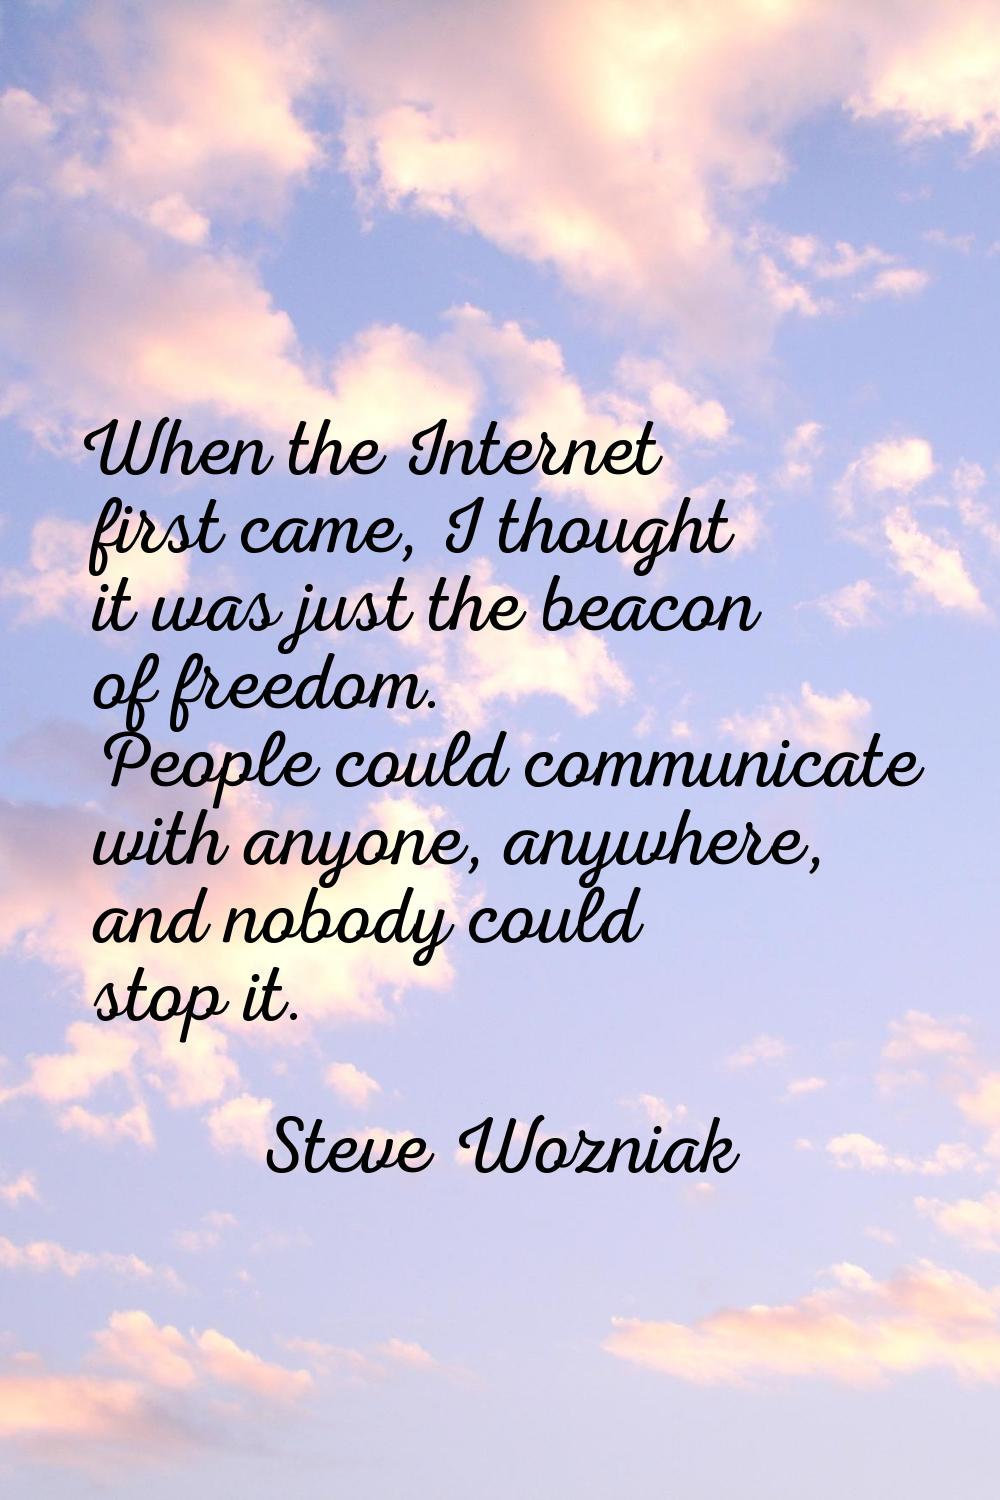 When the Internet first came, I thought it was just the beacon of freedom. People could communicate